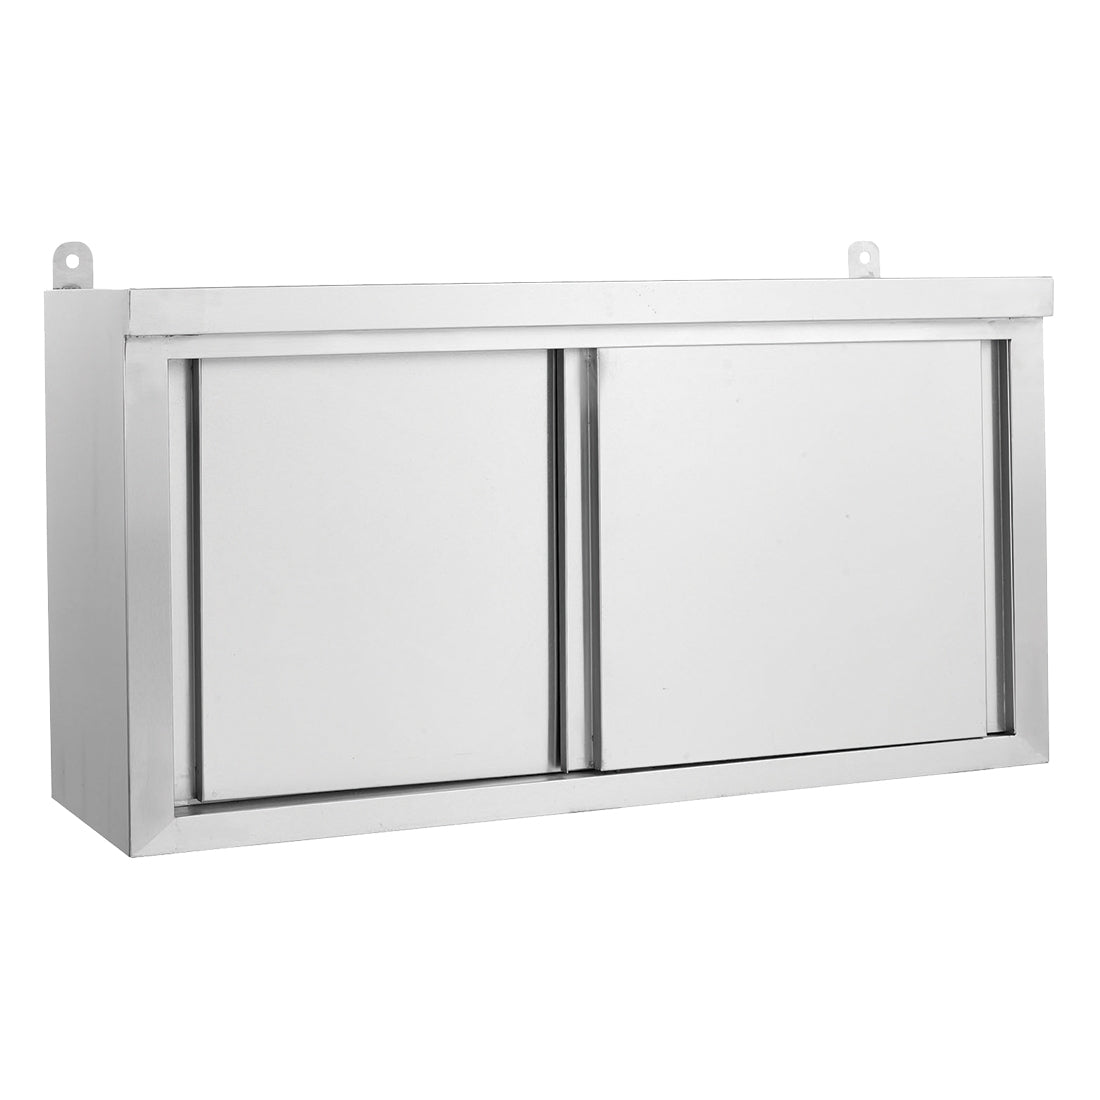 Stainless Steel Wall Cabinet - WC-0900